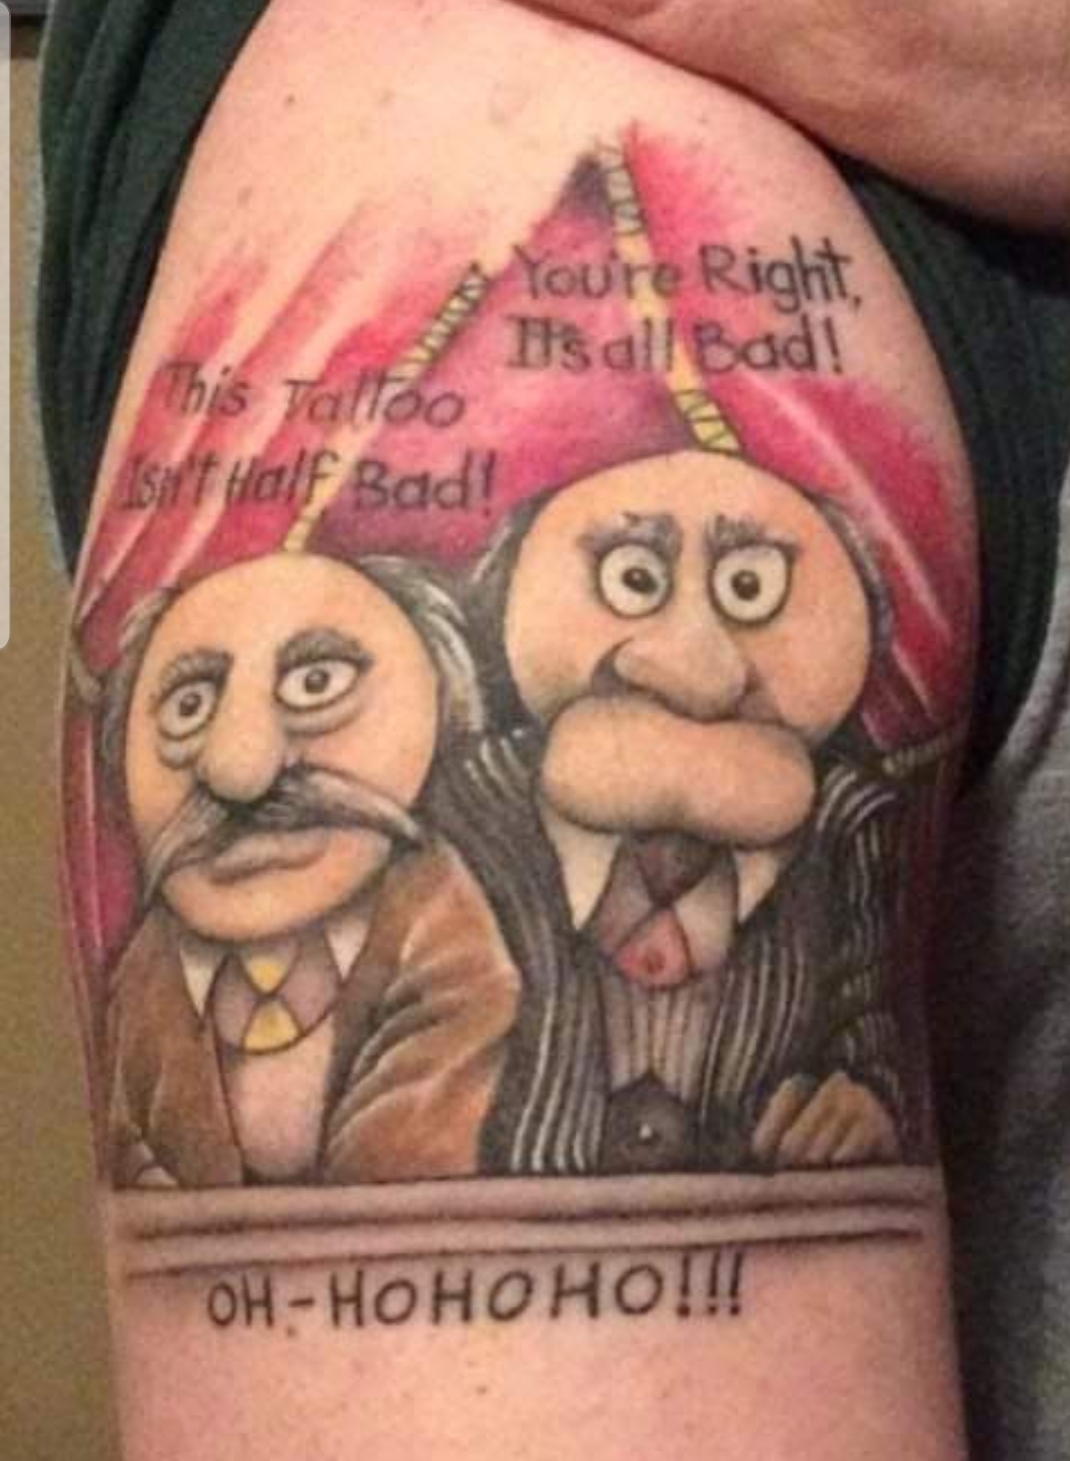 tattoo - Youre Right It's all Bad! This alloo suf Half Bad! OhHohoho!!!